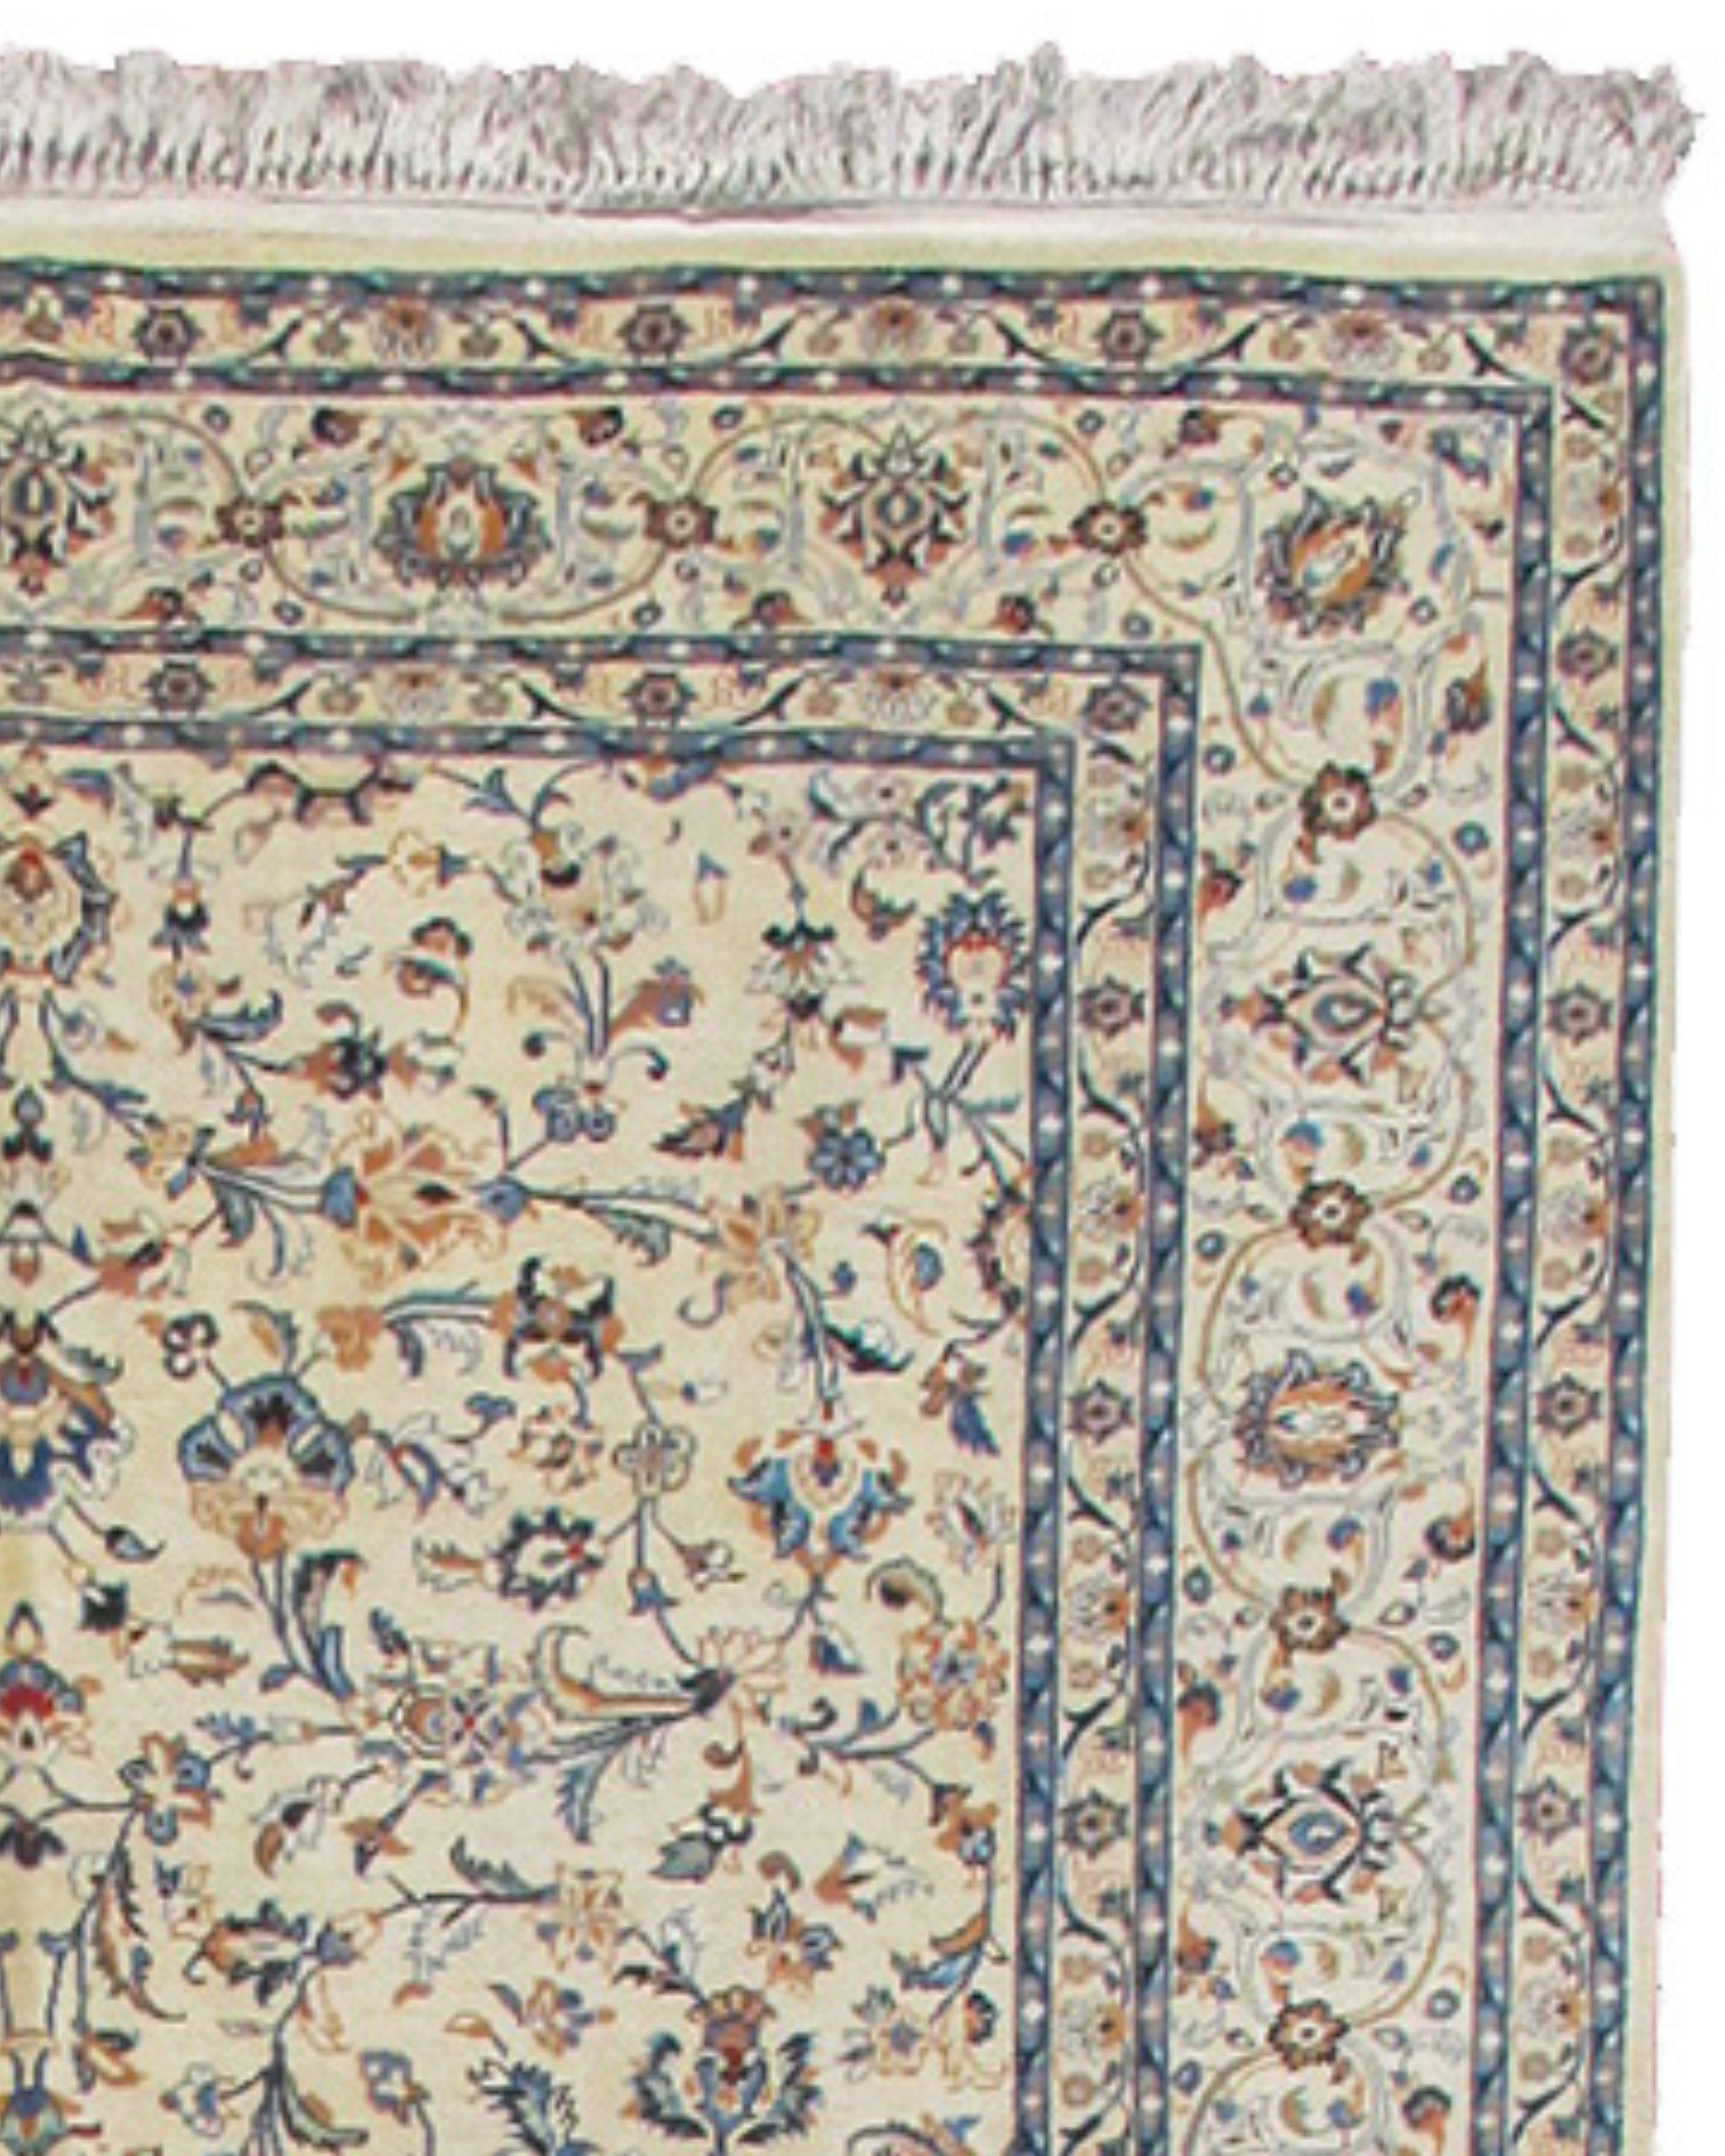 Kashan Rug, Mid-20th Century

Additional Information:
Dimensions: 9'7